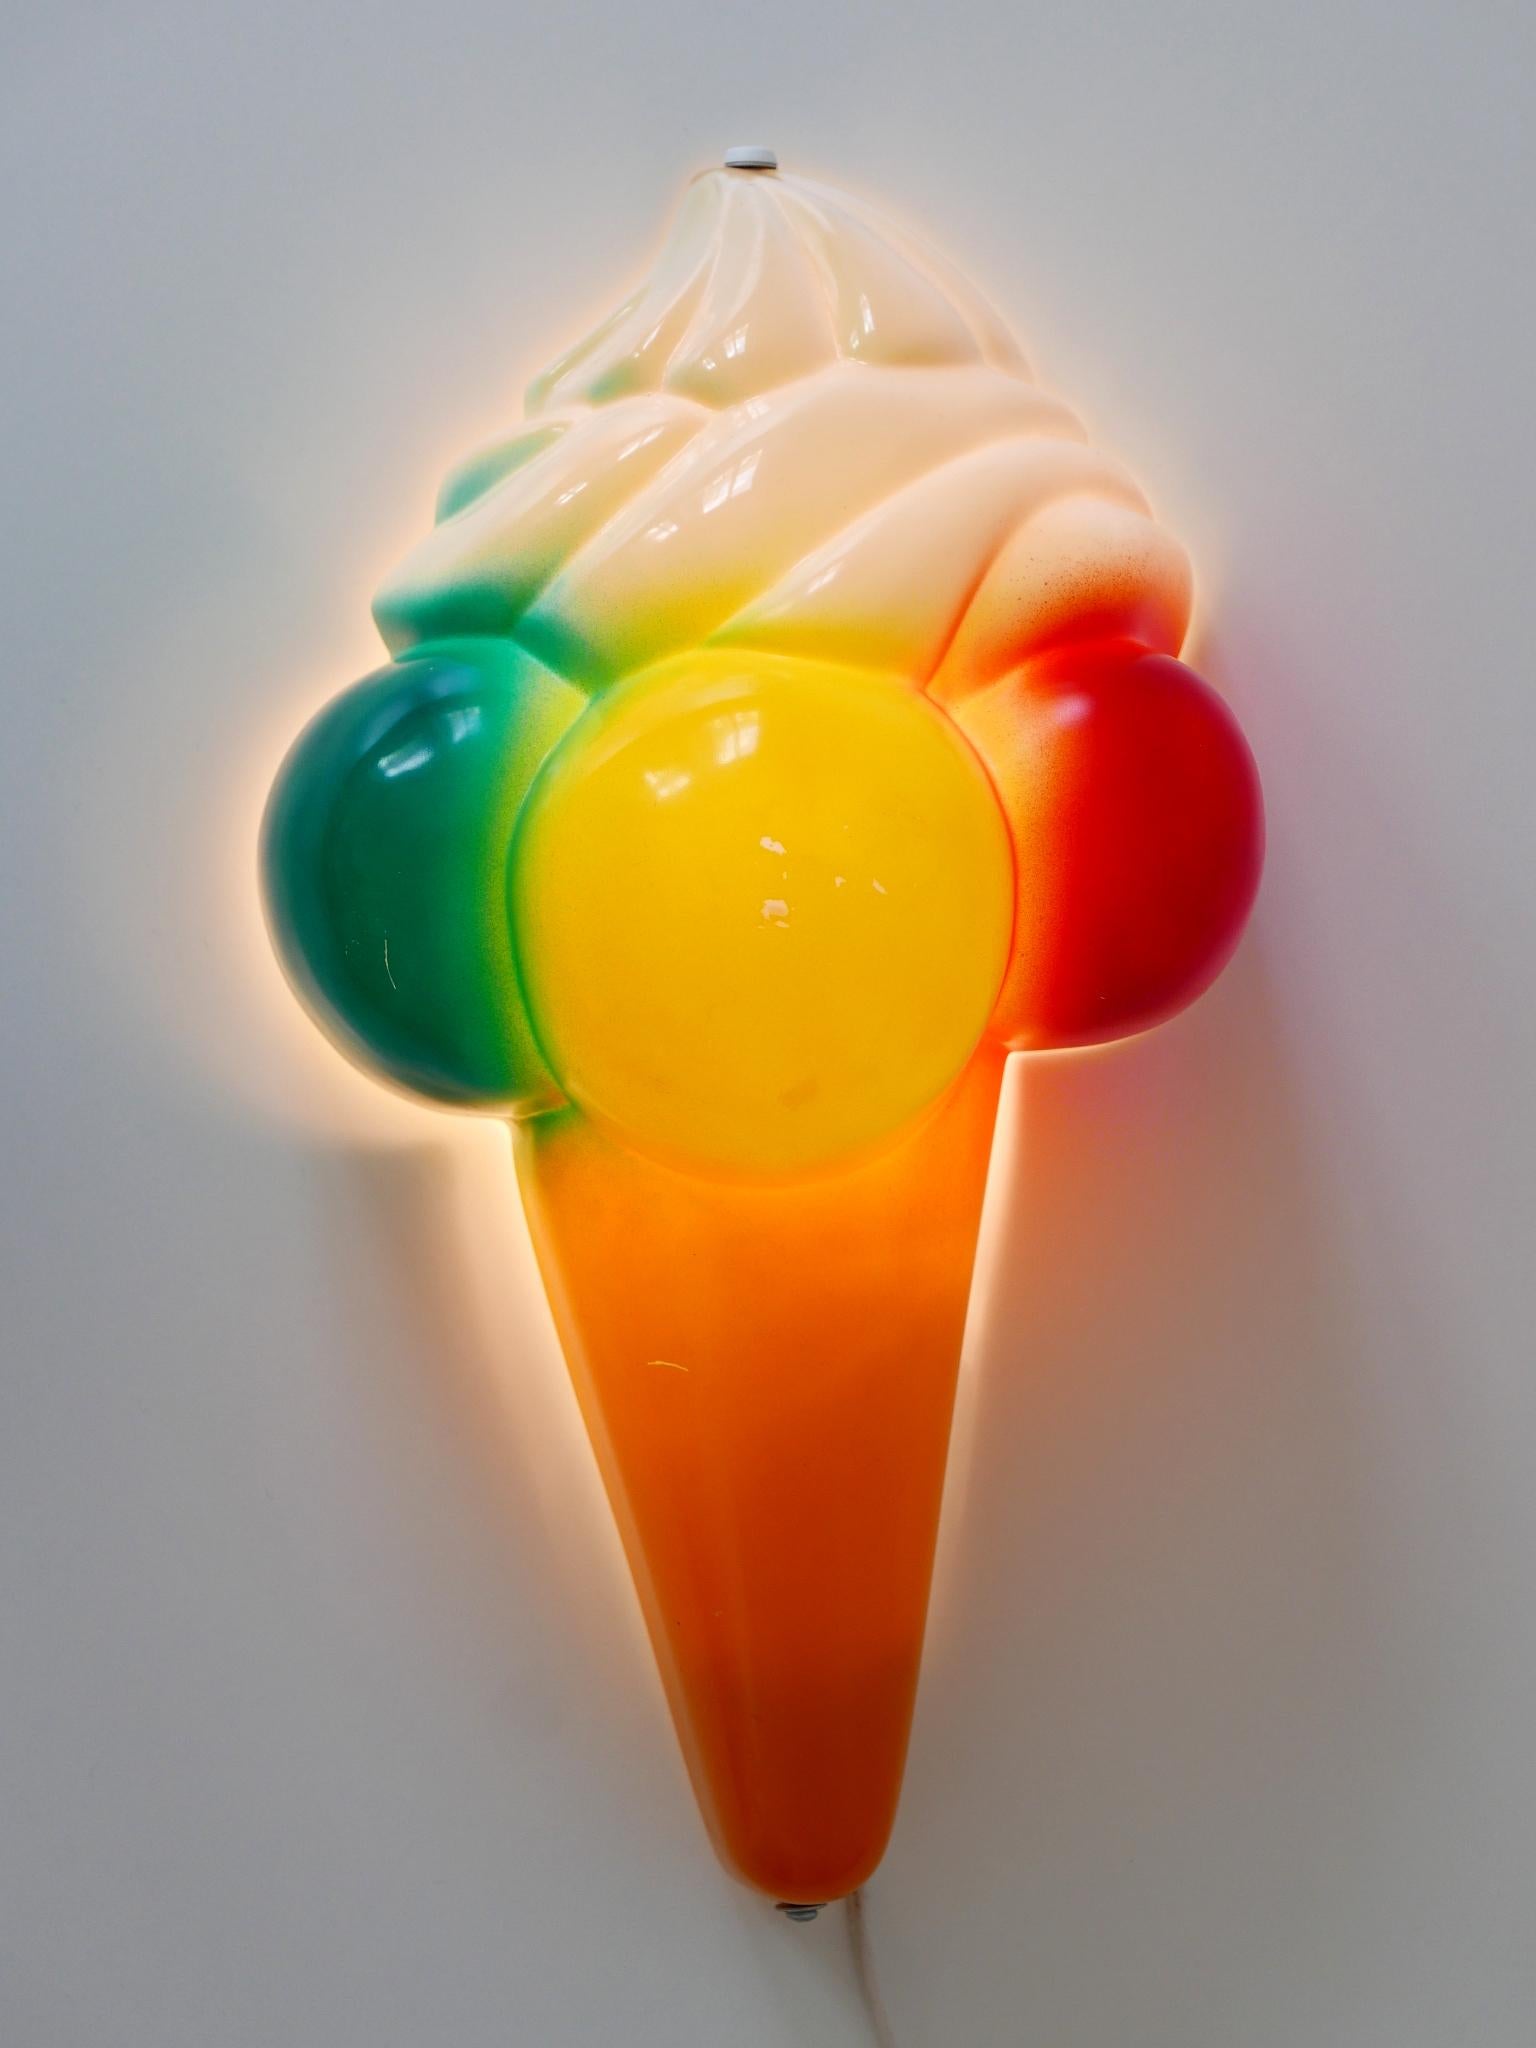 Rare and highly decorative vintage sconce or wall lamp in shape of an ice cream cone. Manufactured probably in Germany, 1980s.

Executed in colored plastic and metal, the wall lamp is executed with  1 x E14 / E12  Edison screw fit bulb socket. It is